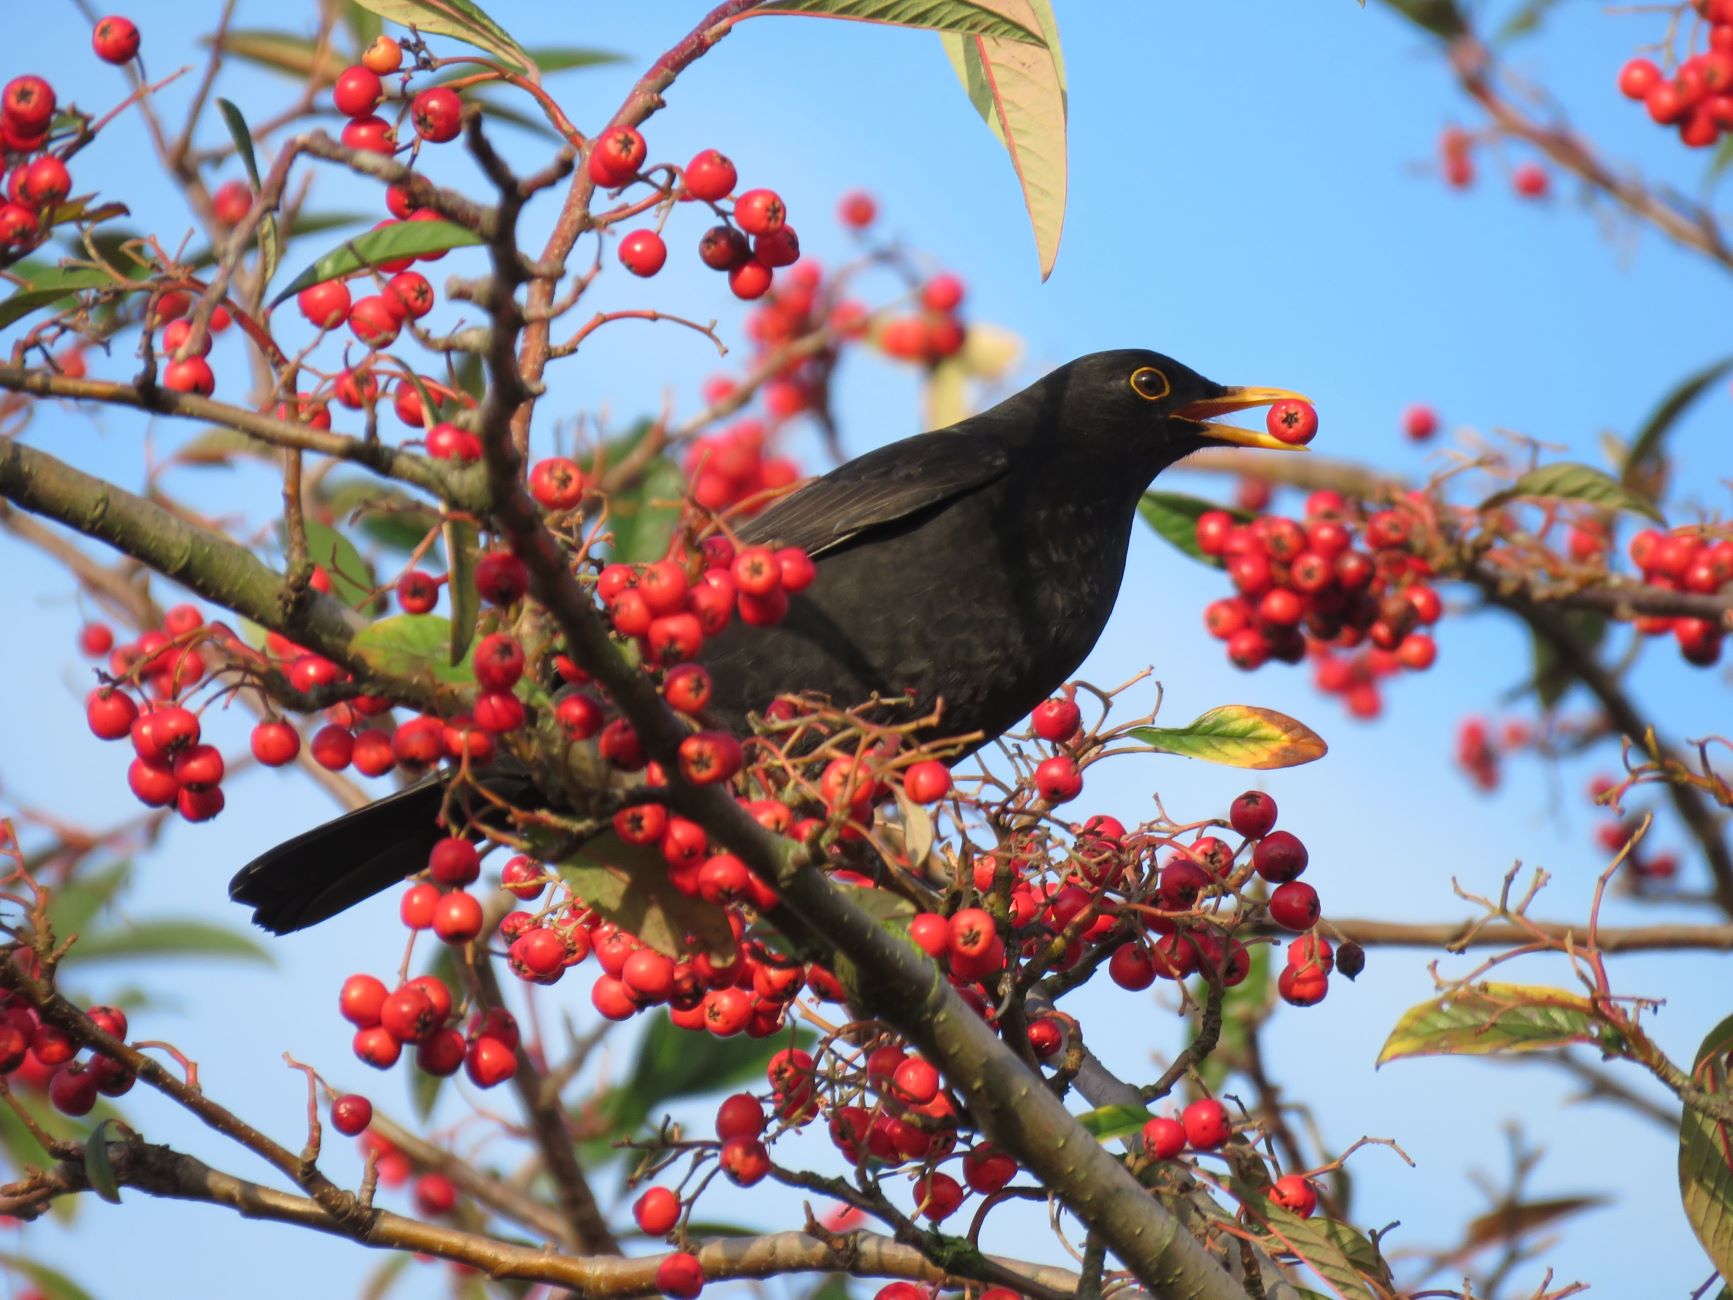 How Do Birds Benefit From Spreading The Seeds Of Berries?